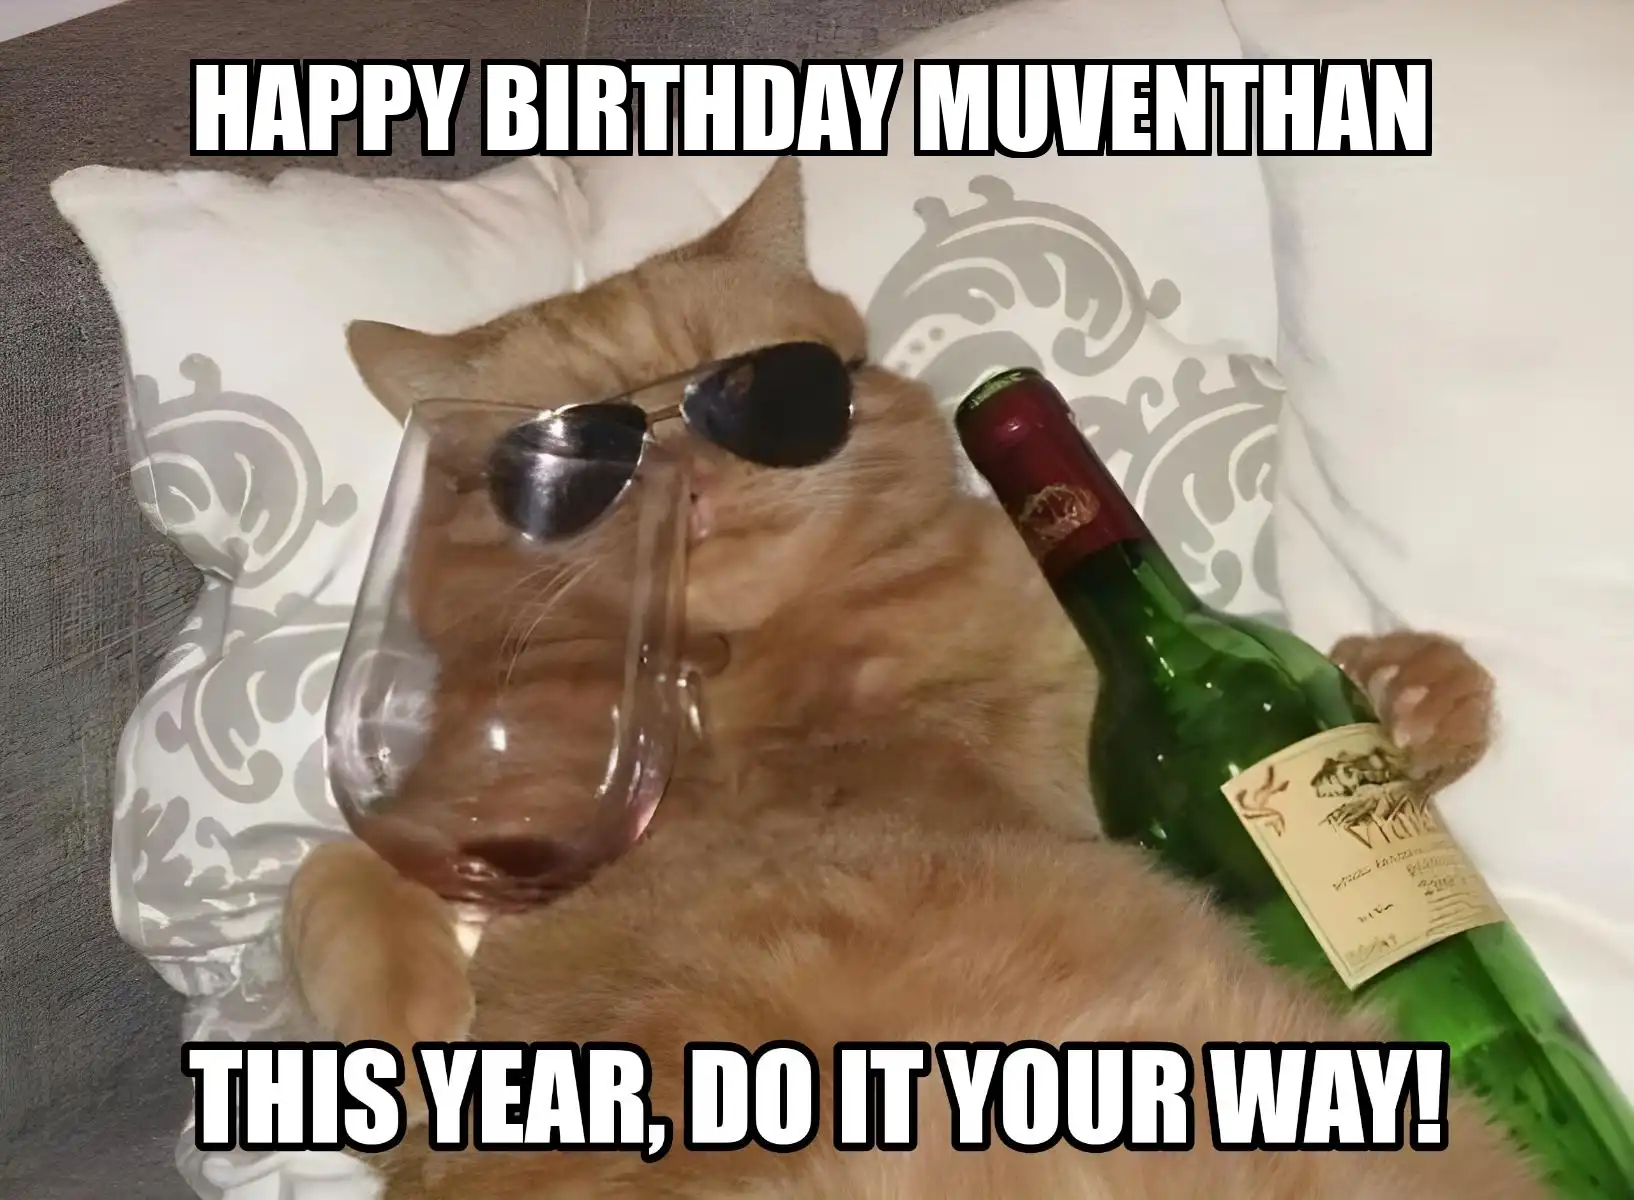 Happy Birthday Muventhan This Year Do It Your Way Meme